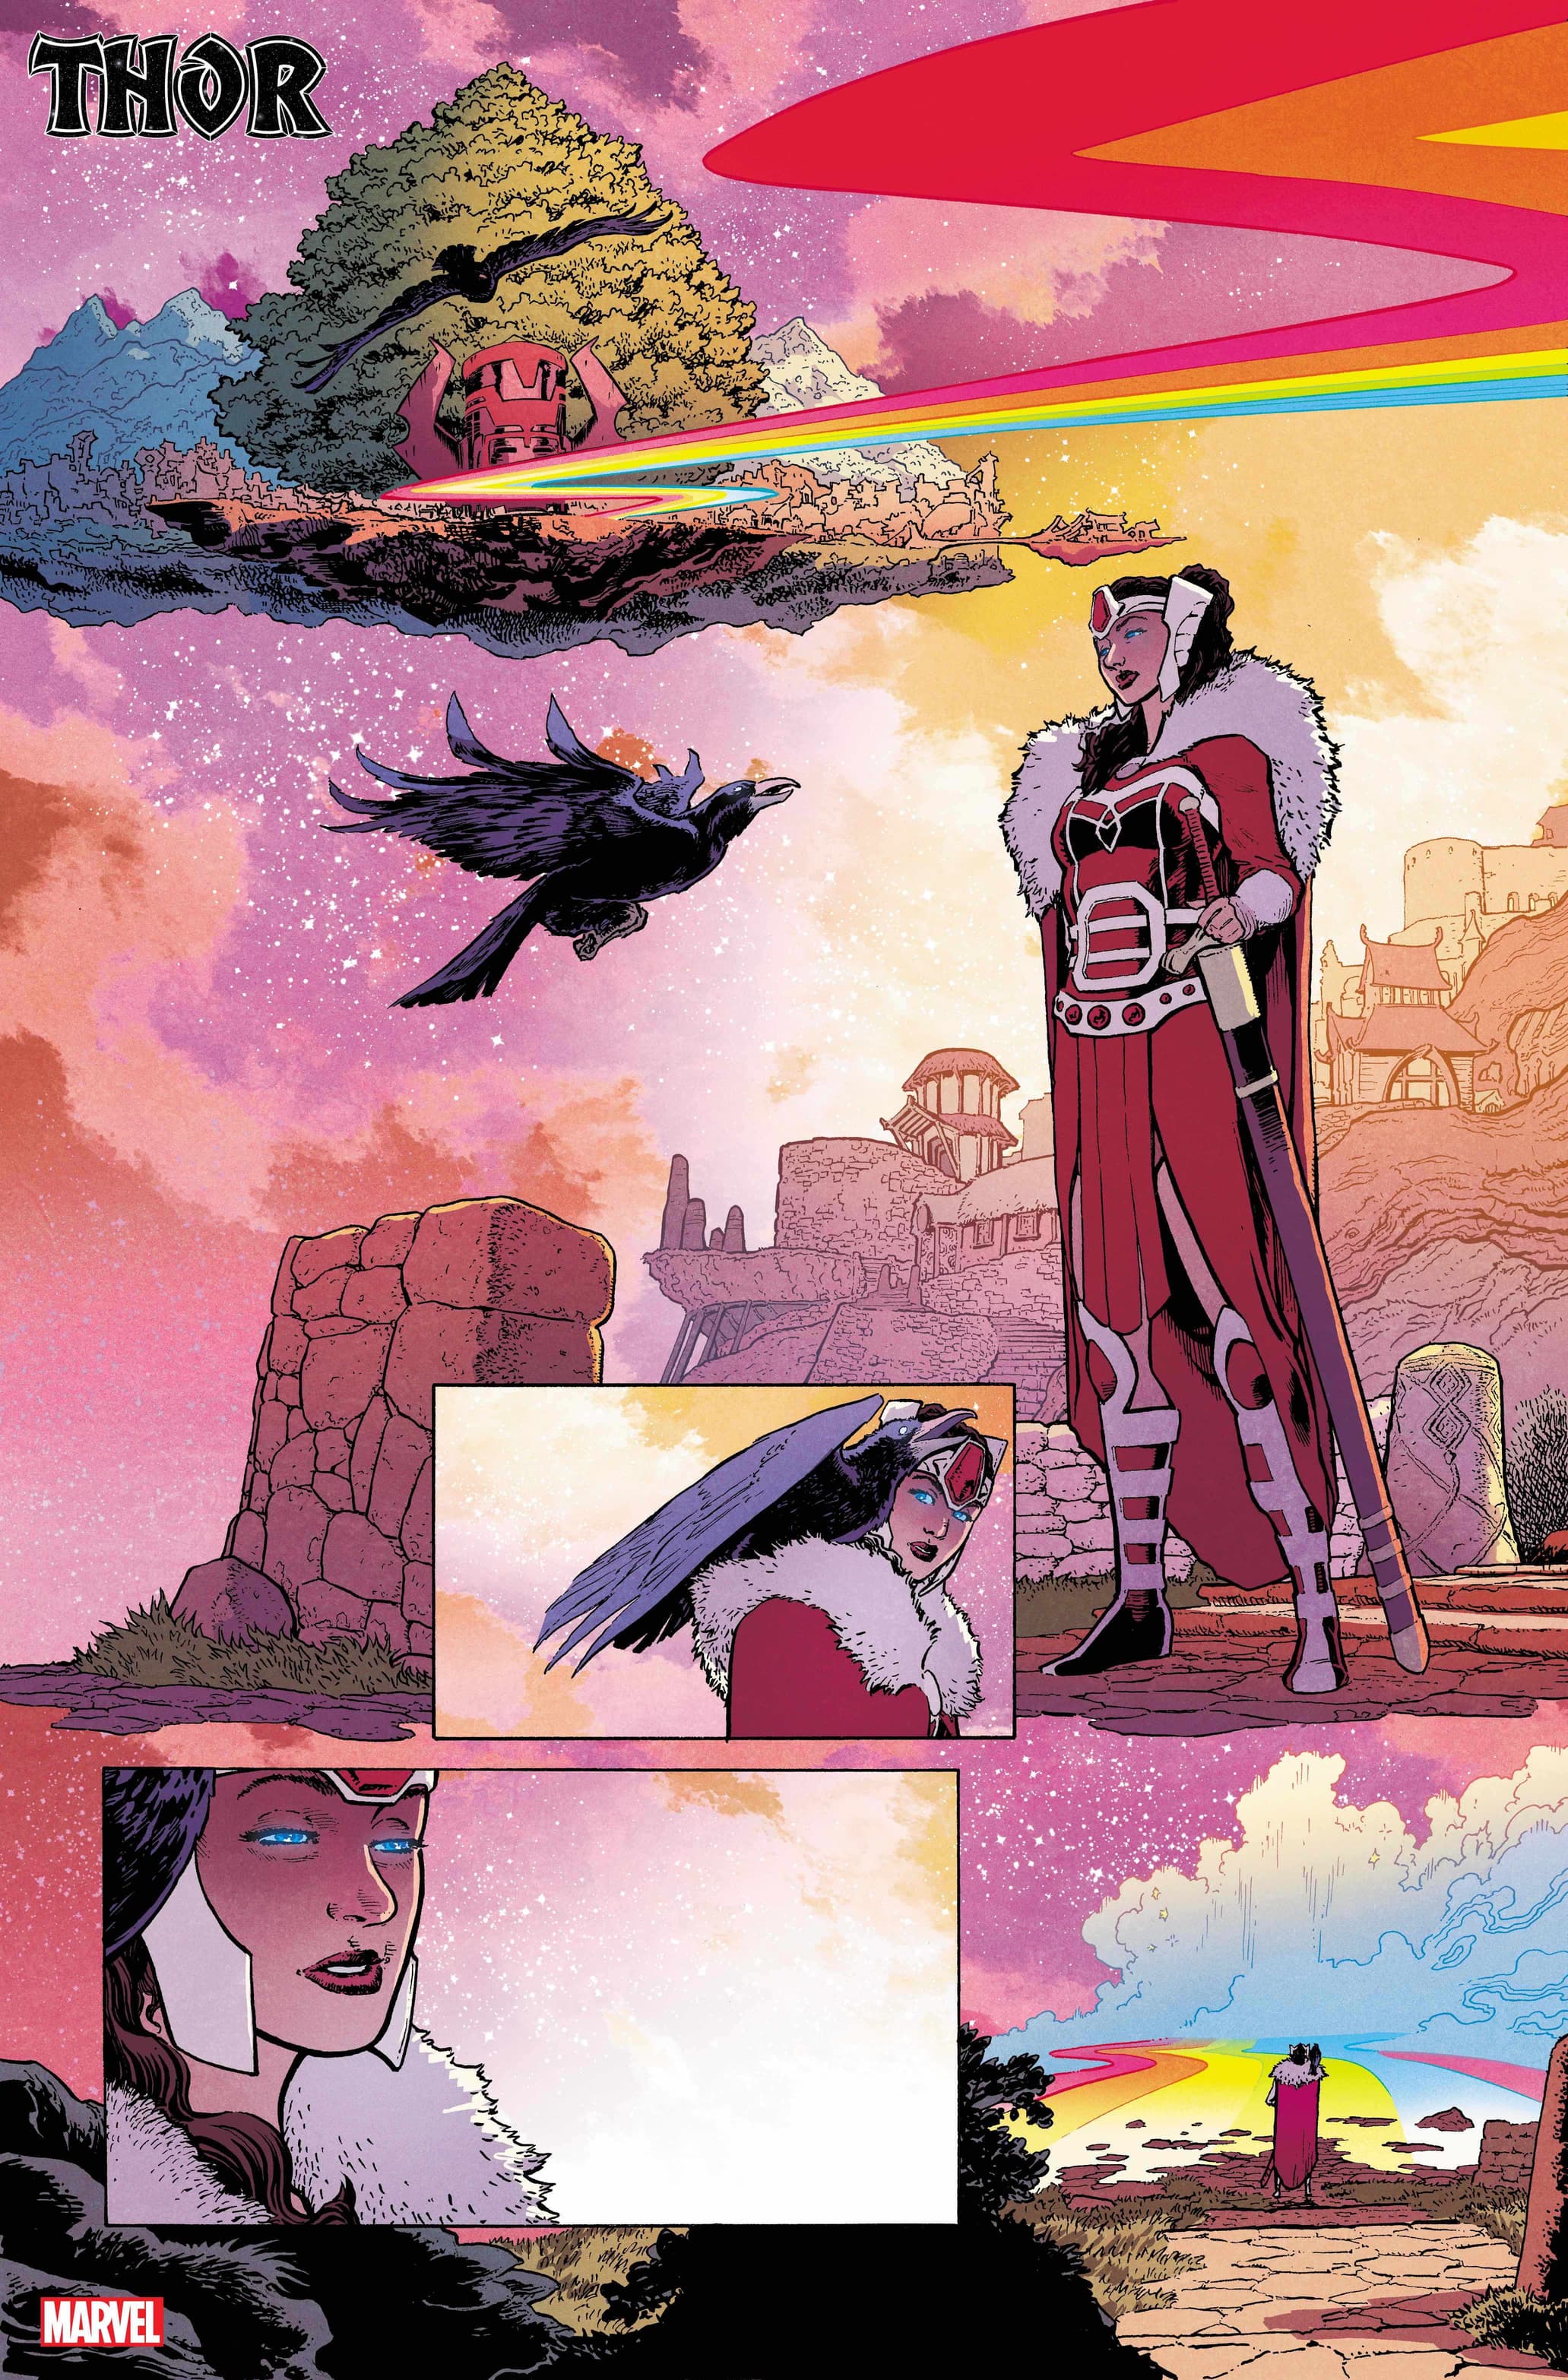 THOR #7 preview interiors by Aaron Kuder and Matt Wilson